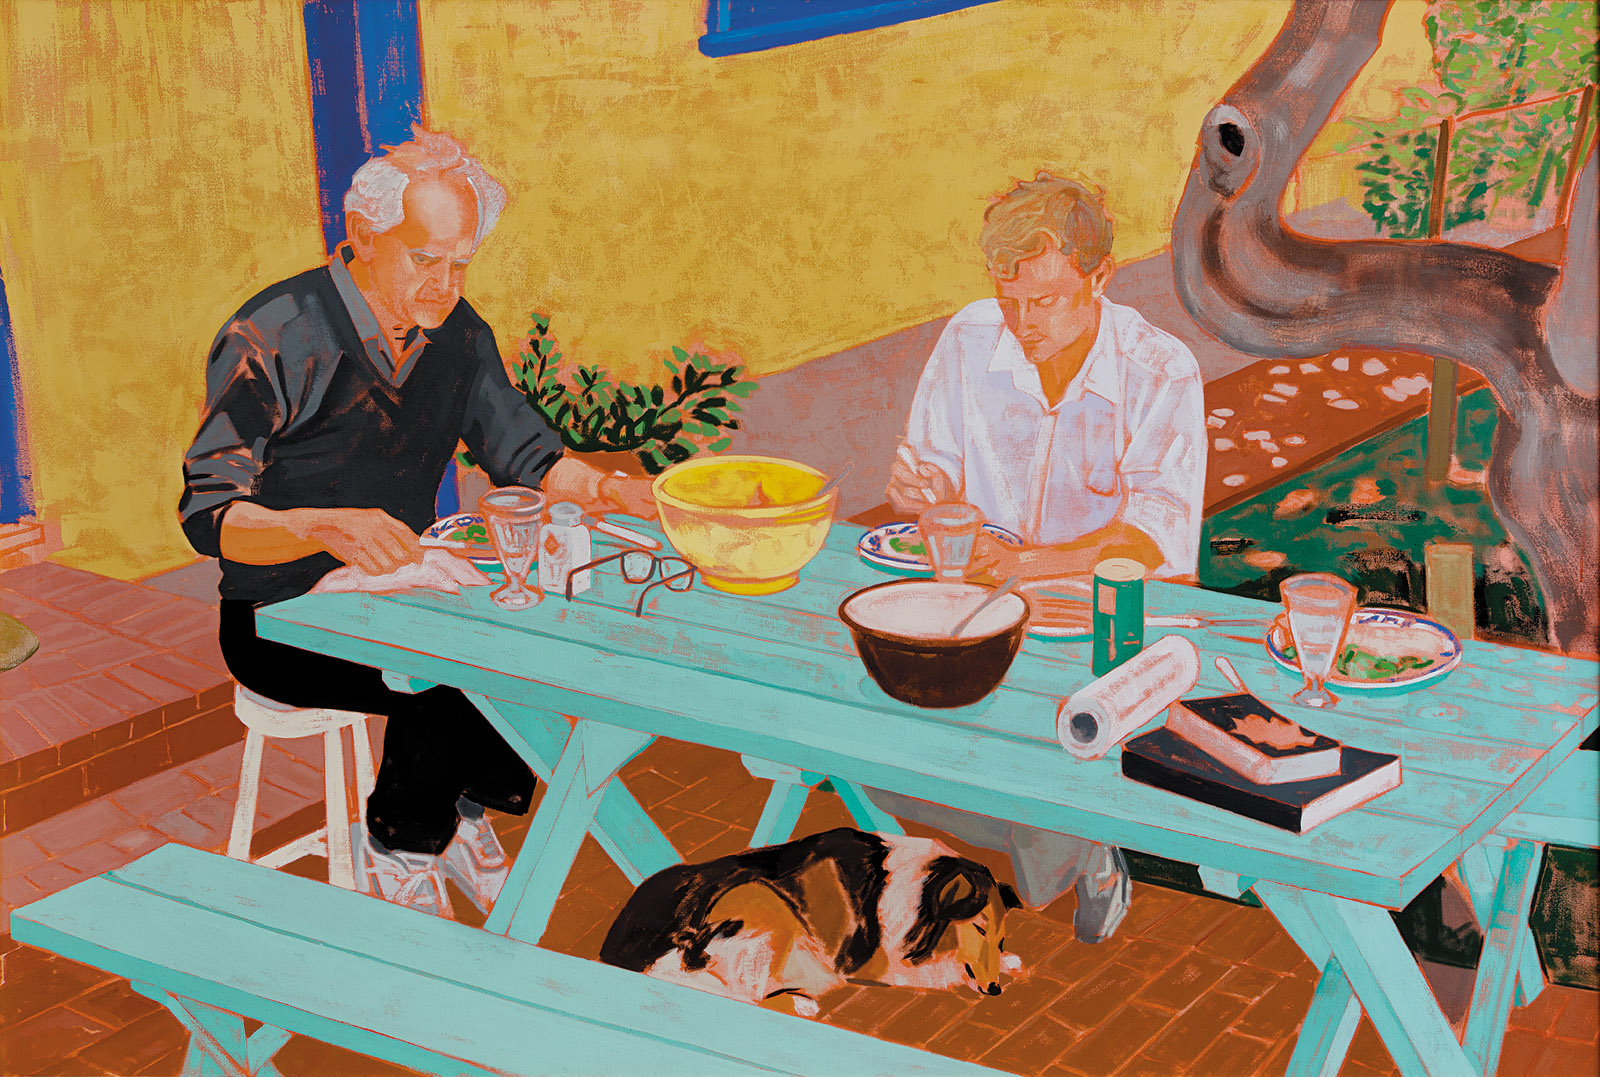 Patricia Patterson: The Conversation (Manny and Steve at the Table), 1990